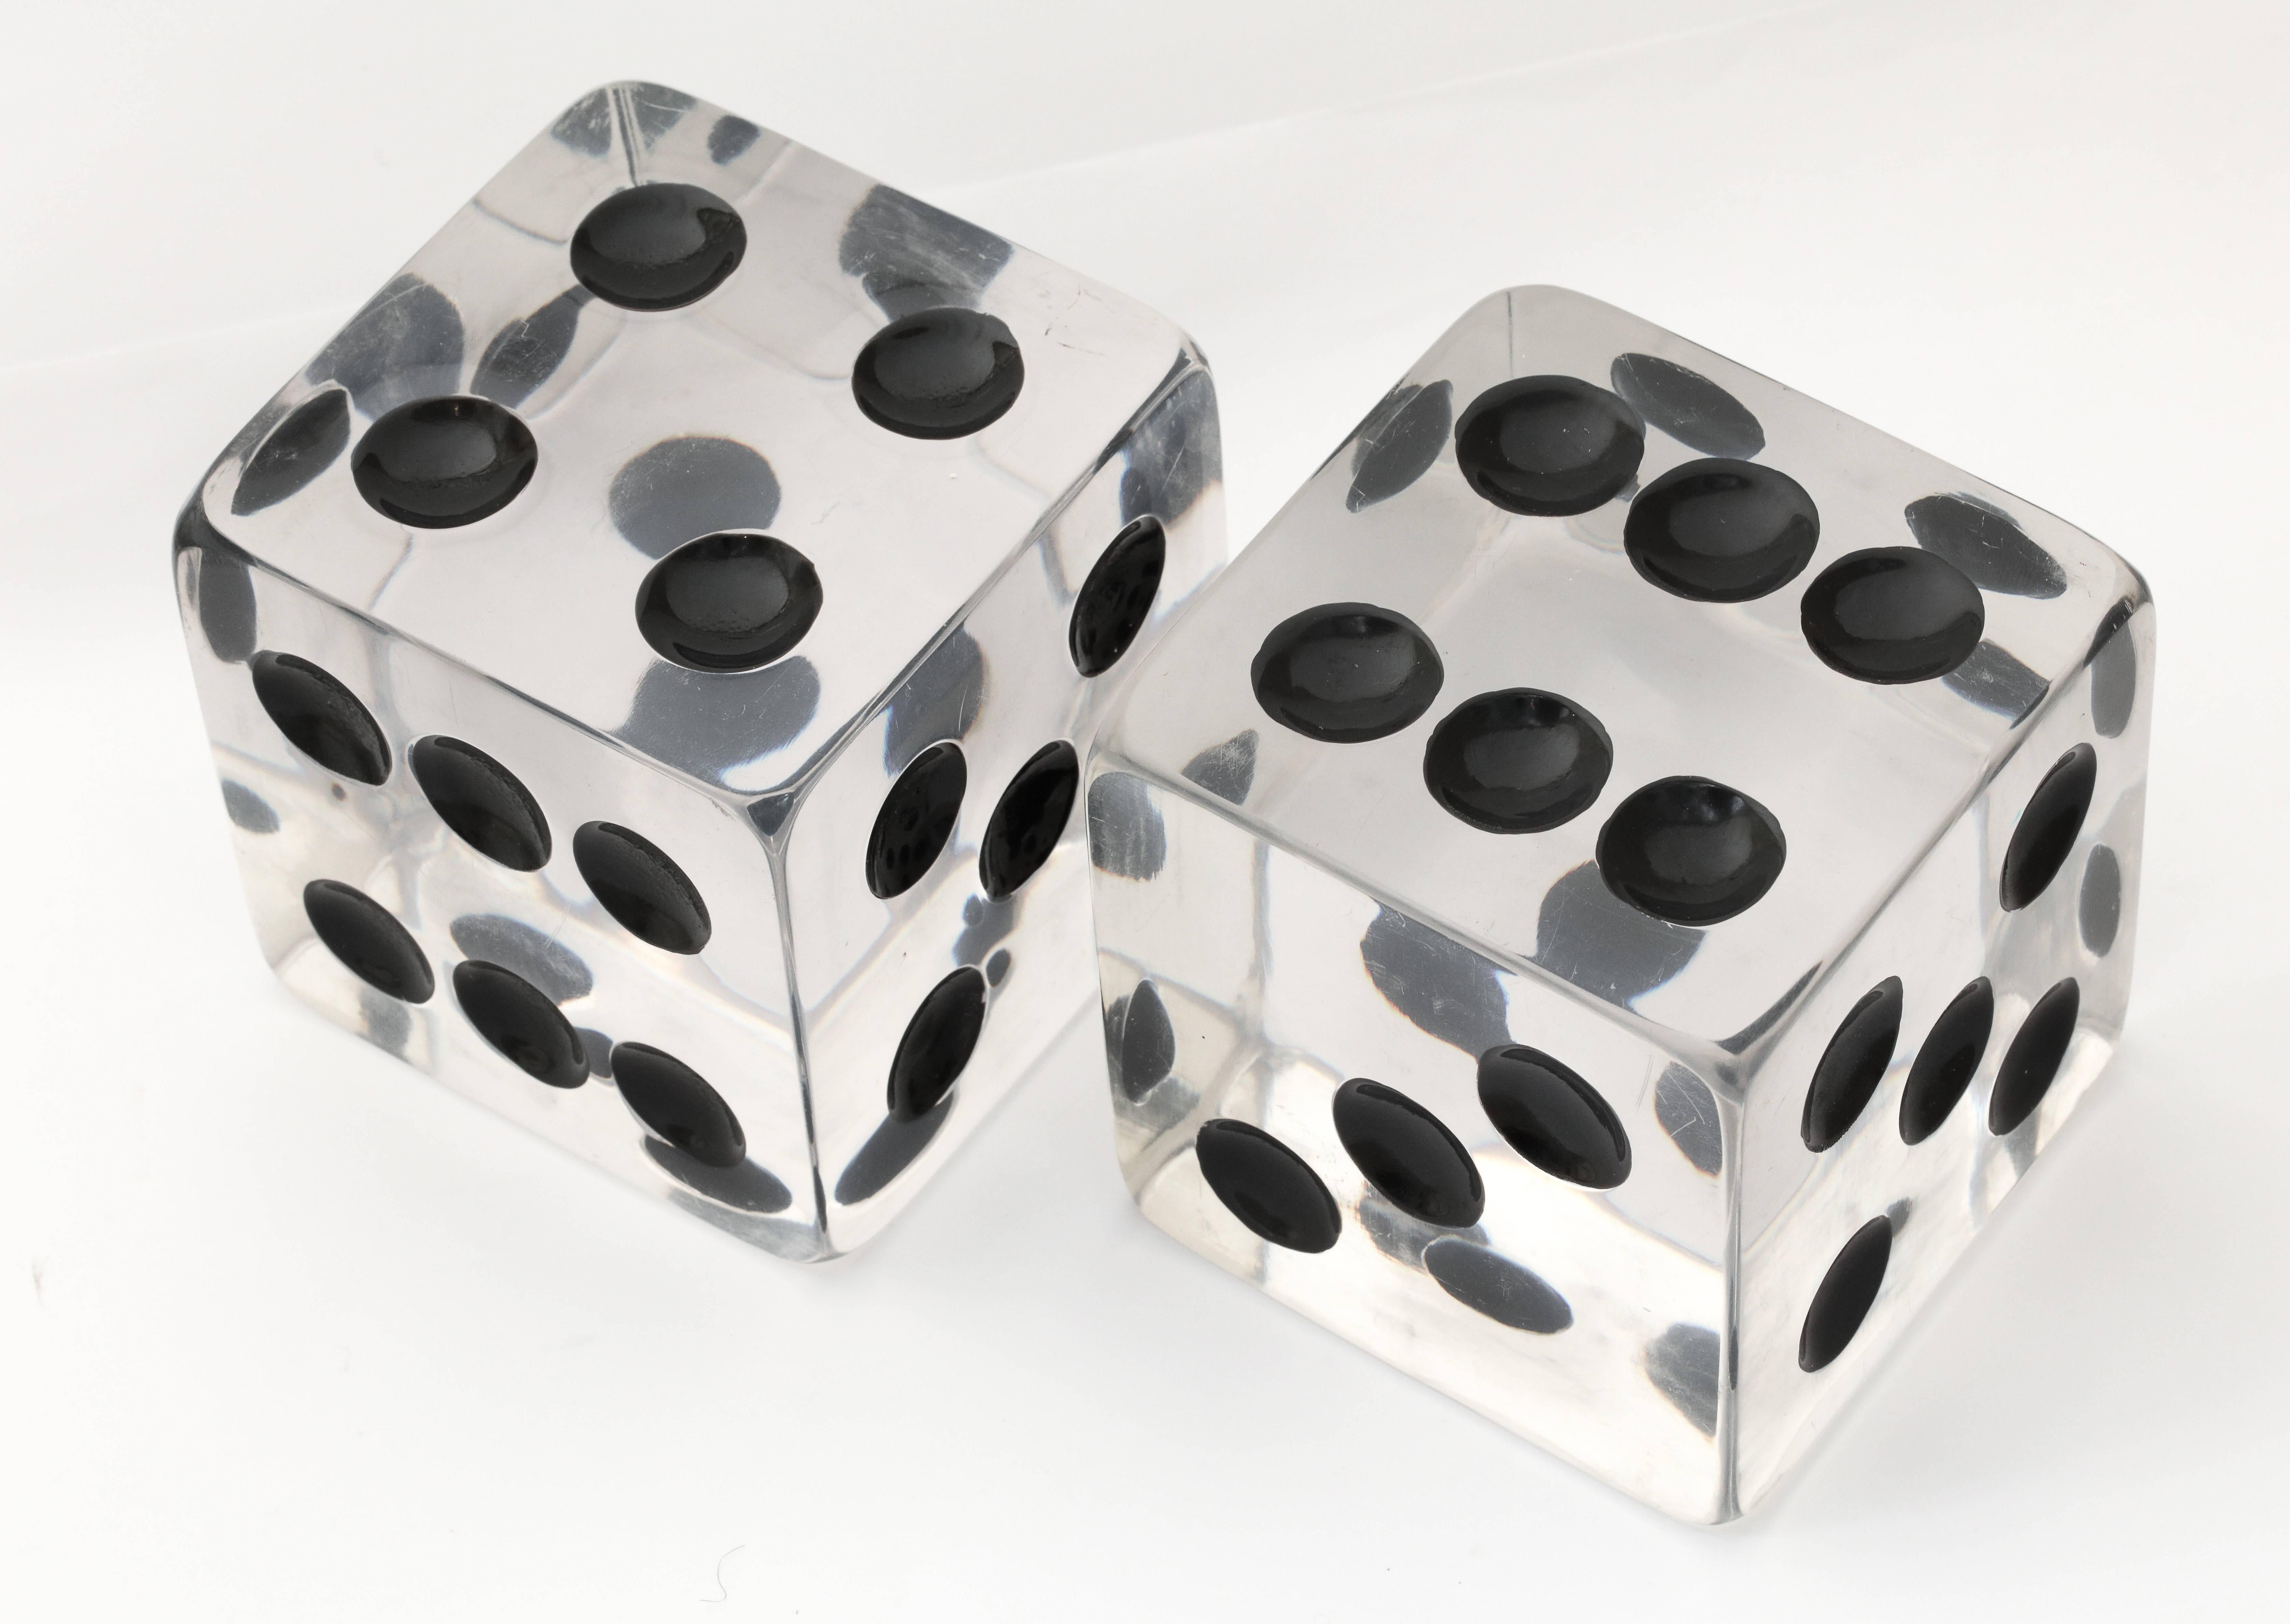 A lucky pair of large dice that work as paperweights or bookends.